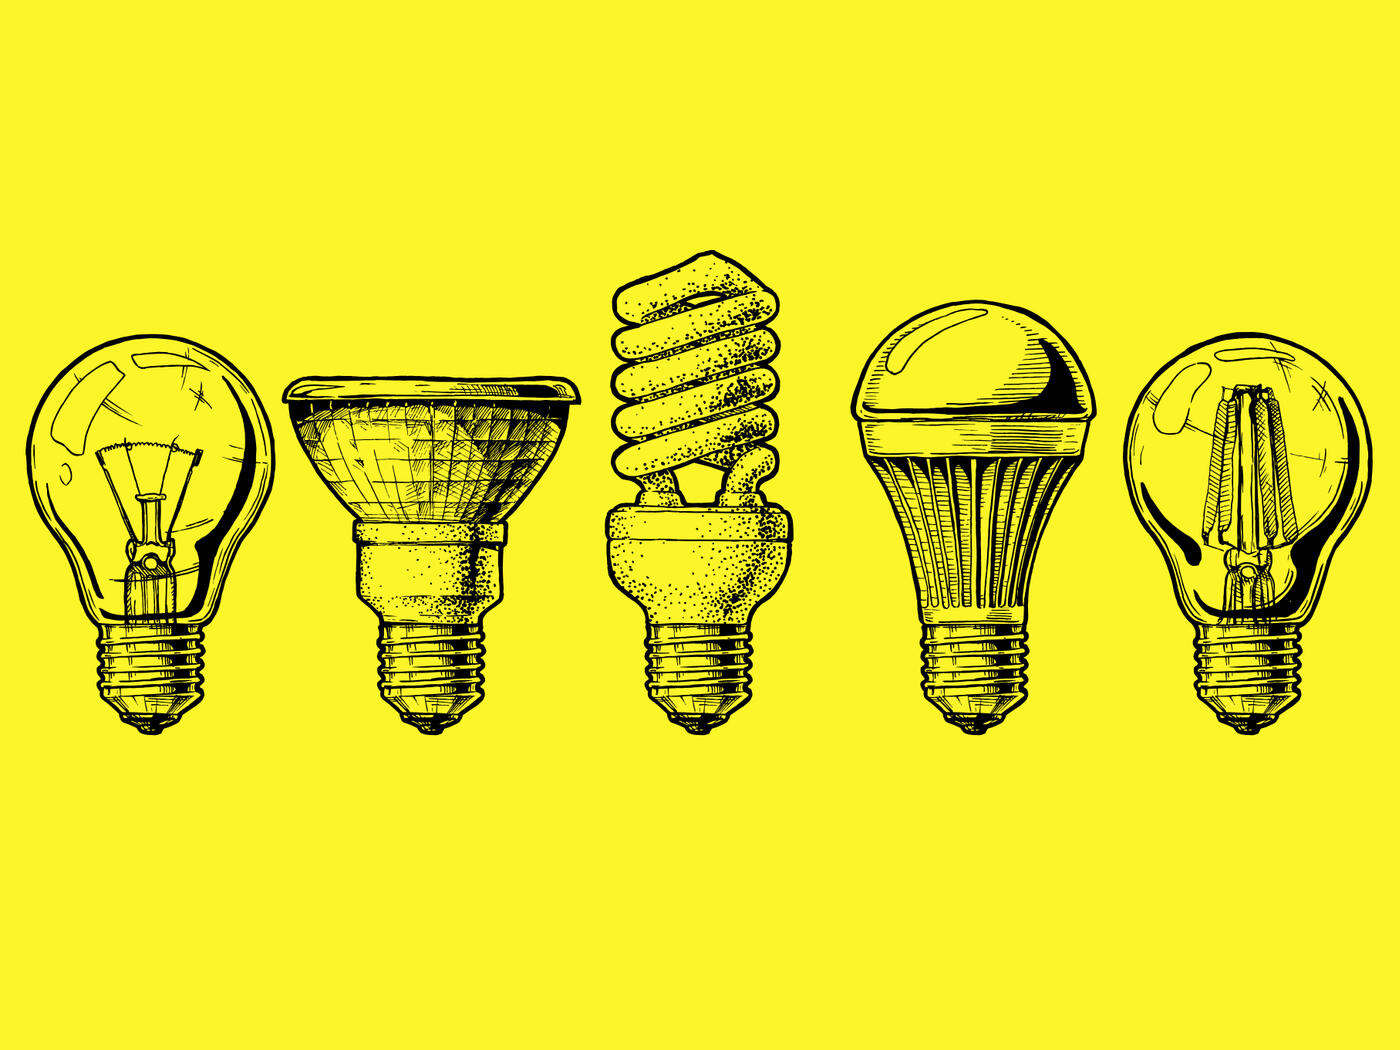 5 different kinds of lightbulbs illustrated